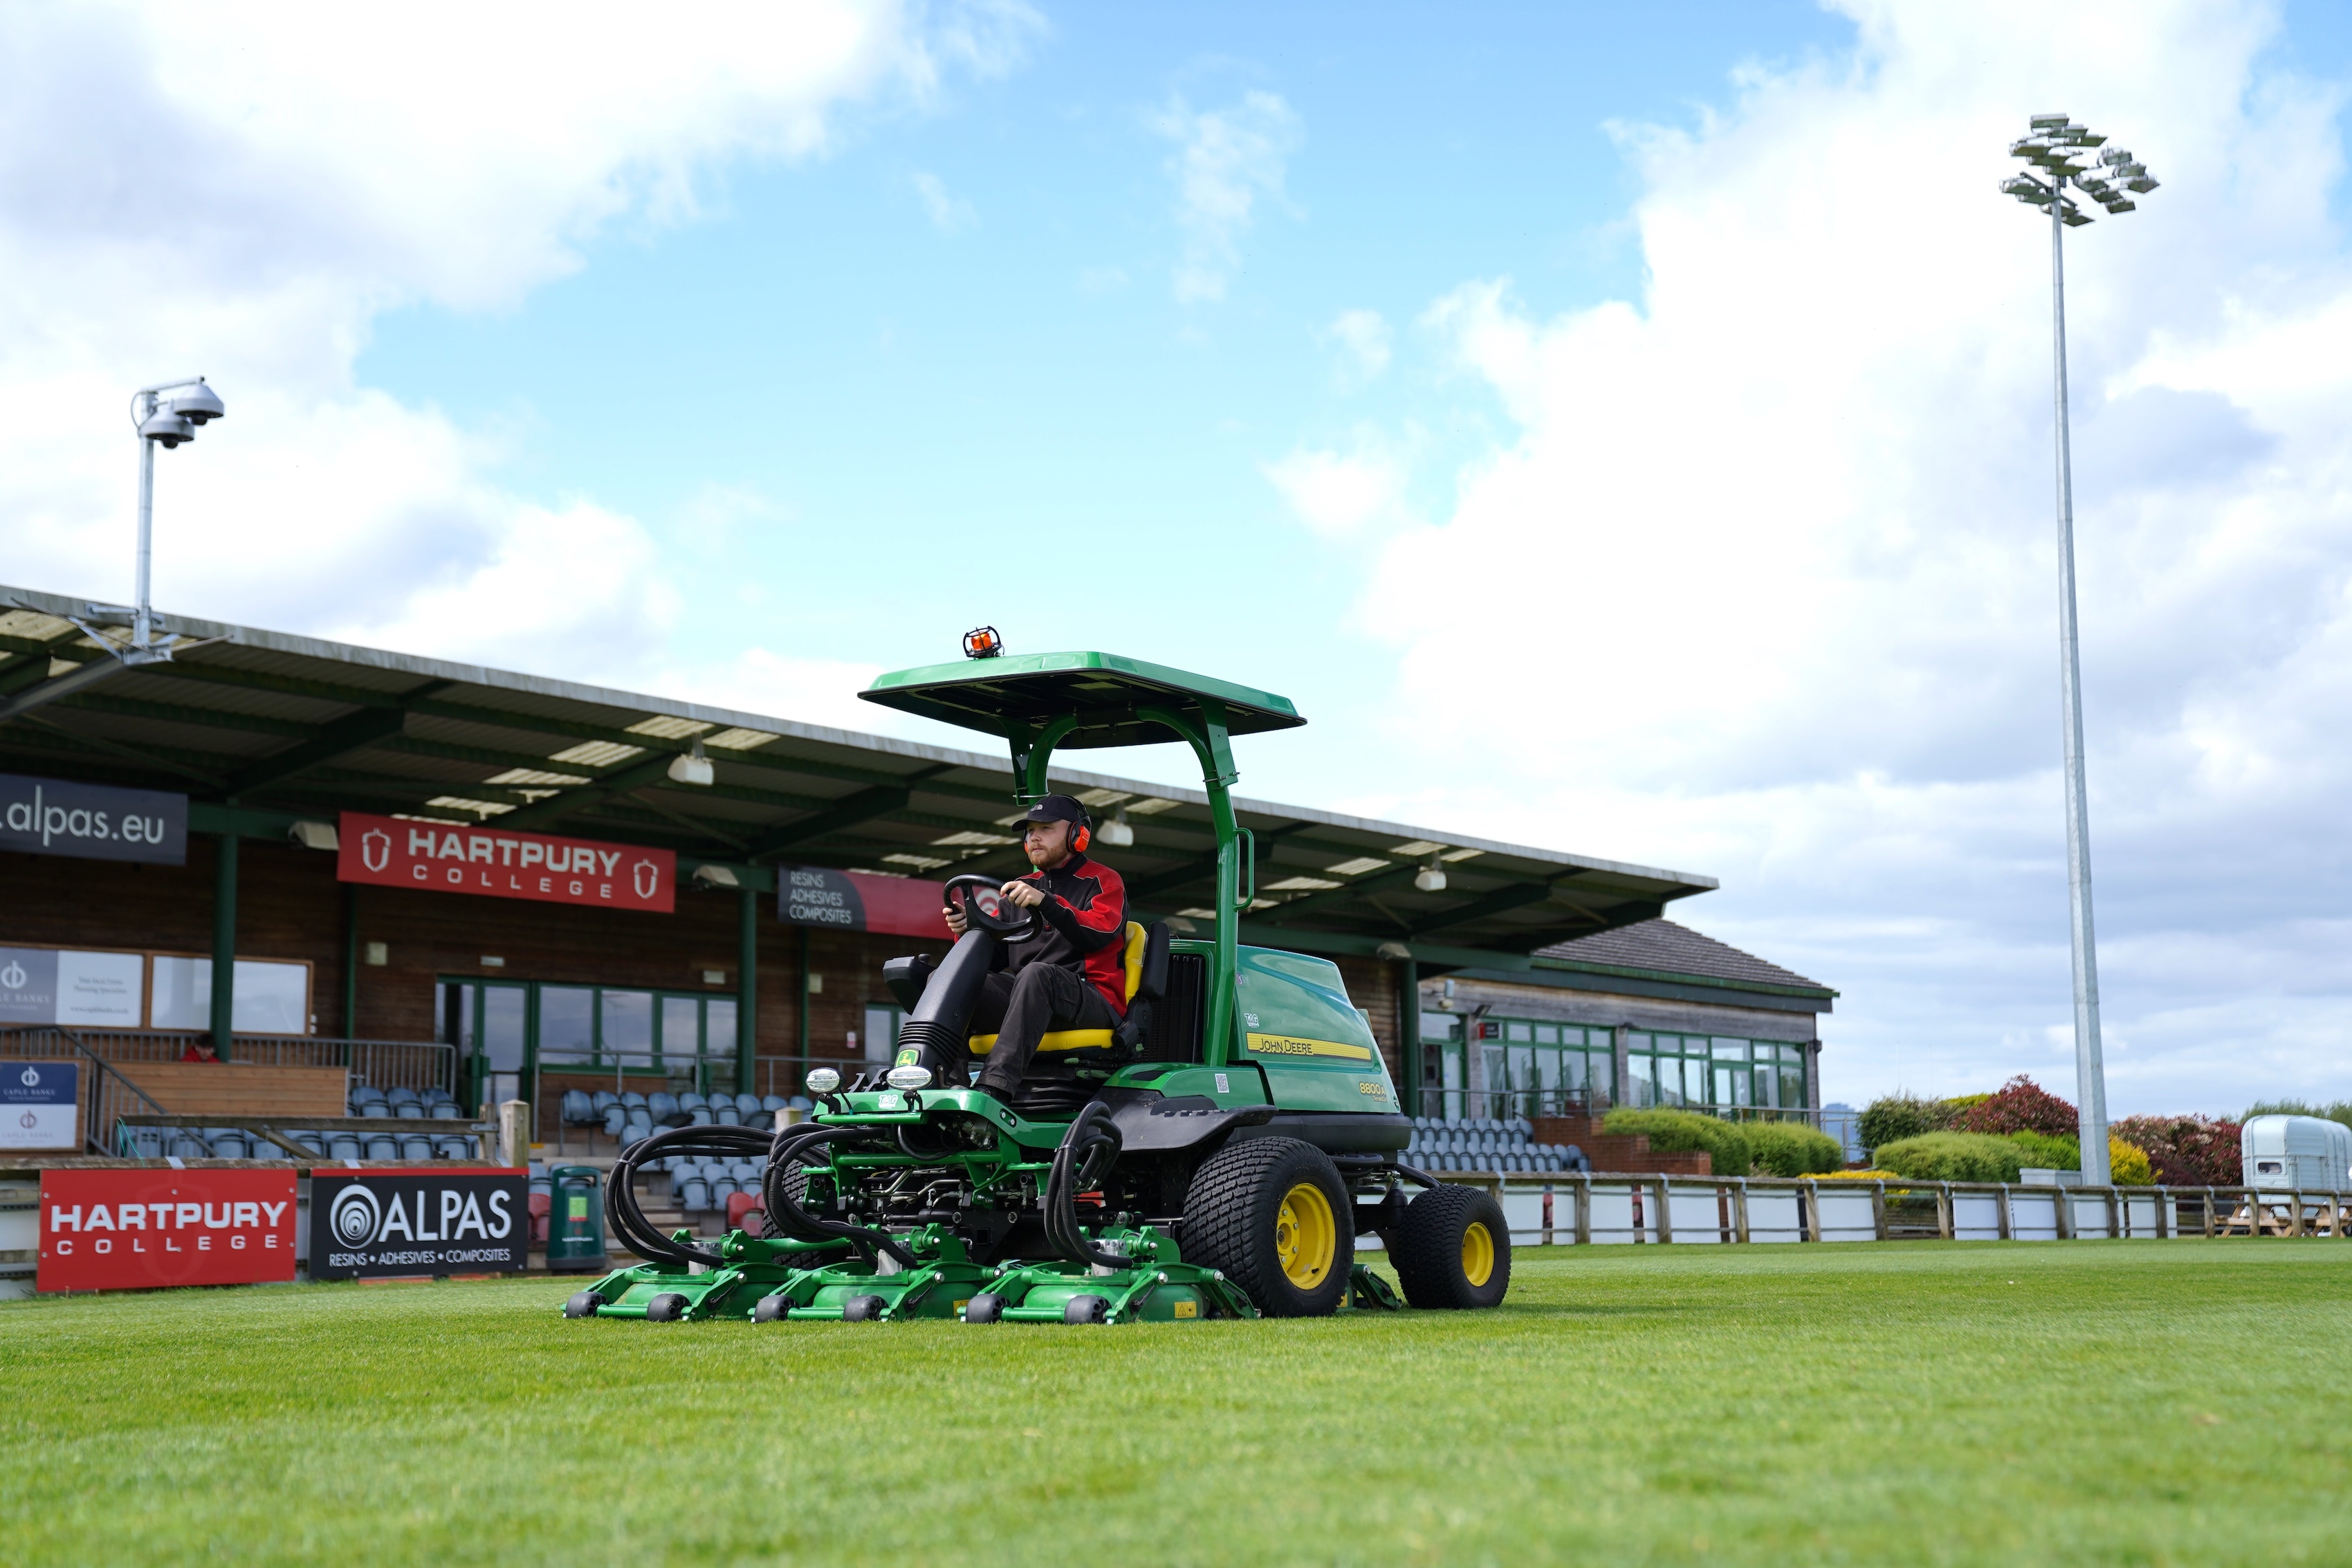 Mowing Hartpury’s flagship rugby pitch with the new John Deere 8800A